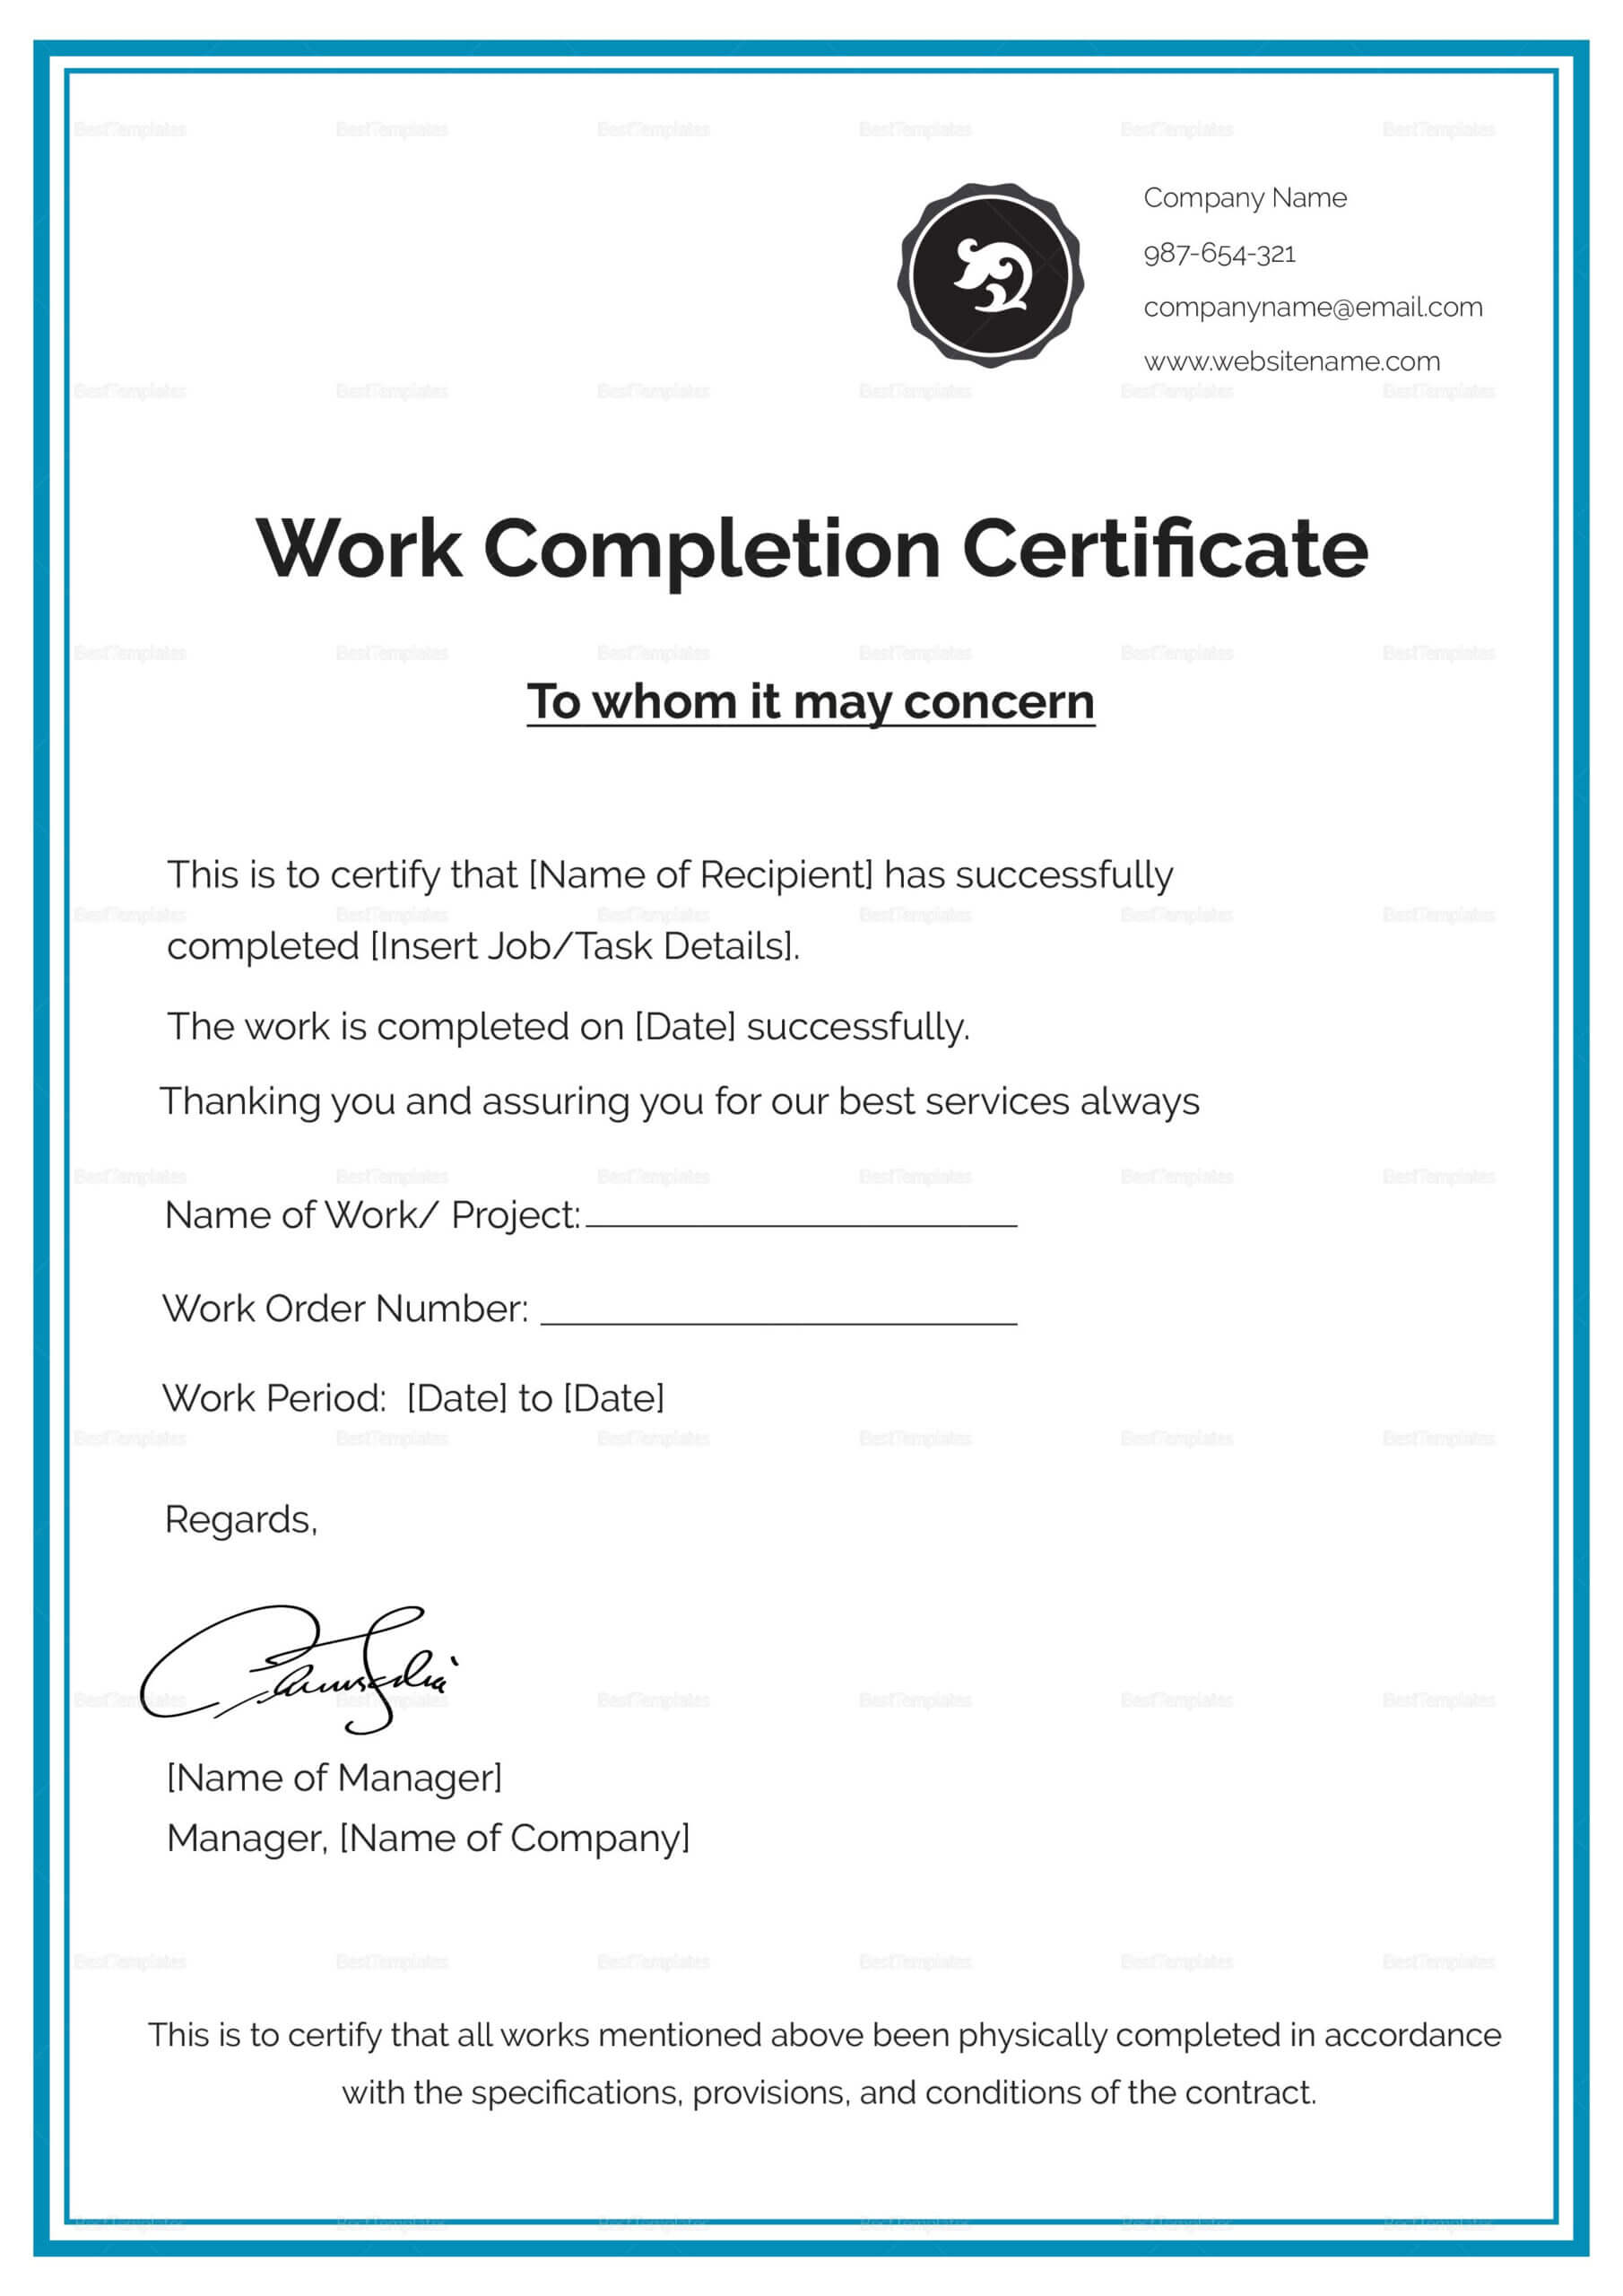 Work Completion Certificate Template In 2020 | Business Pertaining To Certificate Of Completion Construction Templates